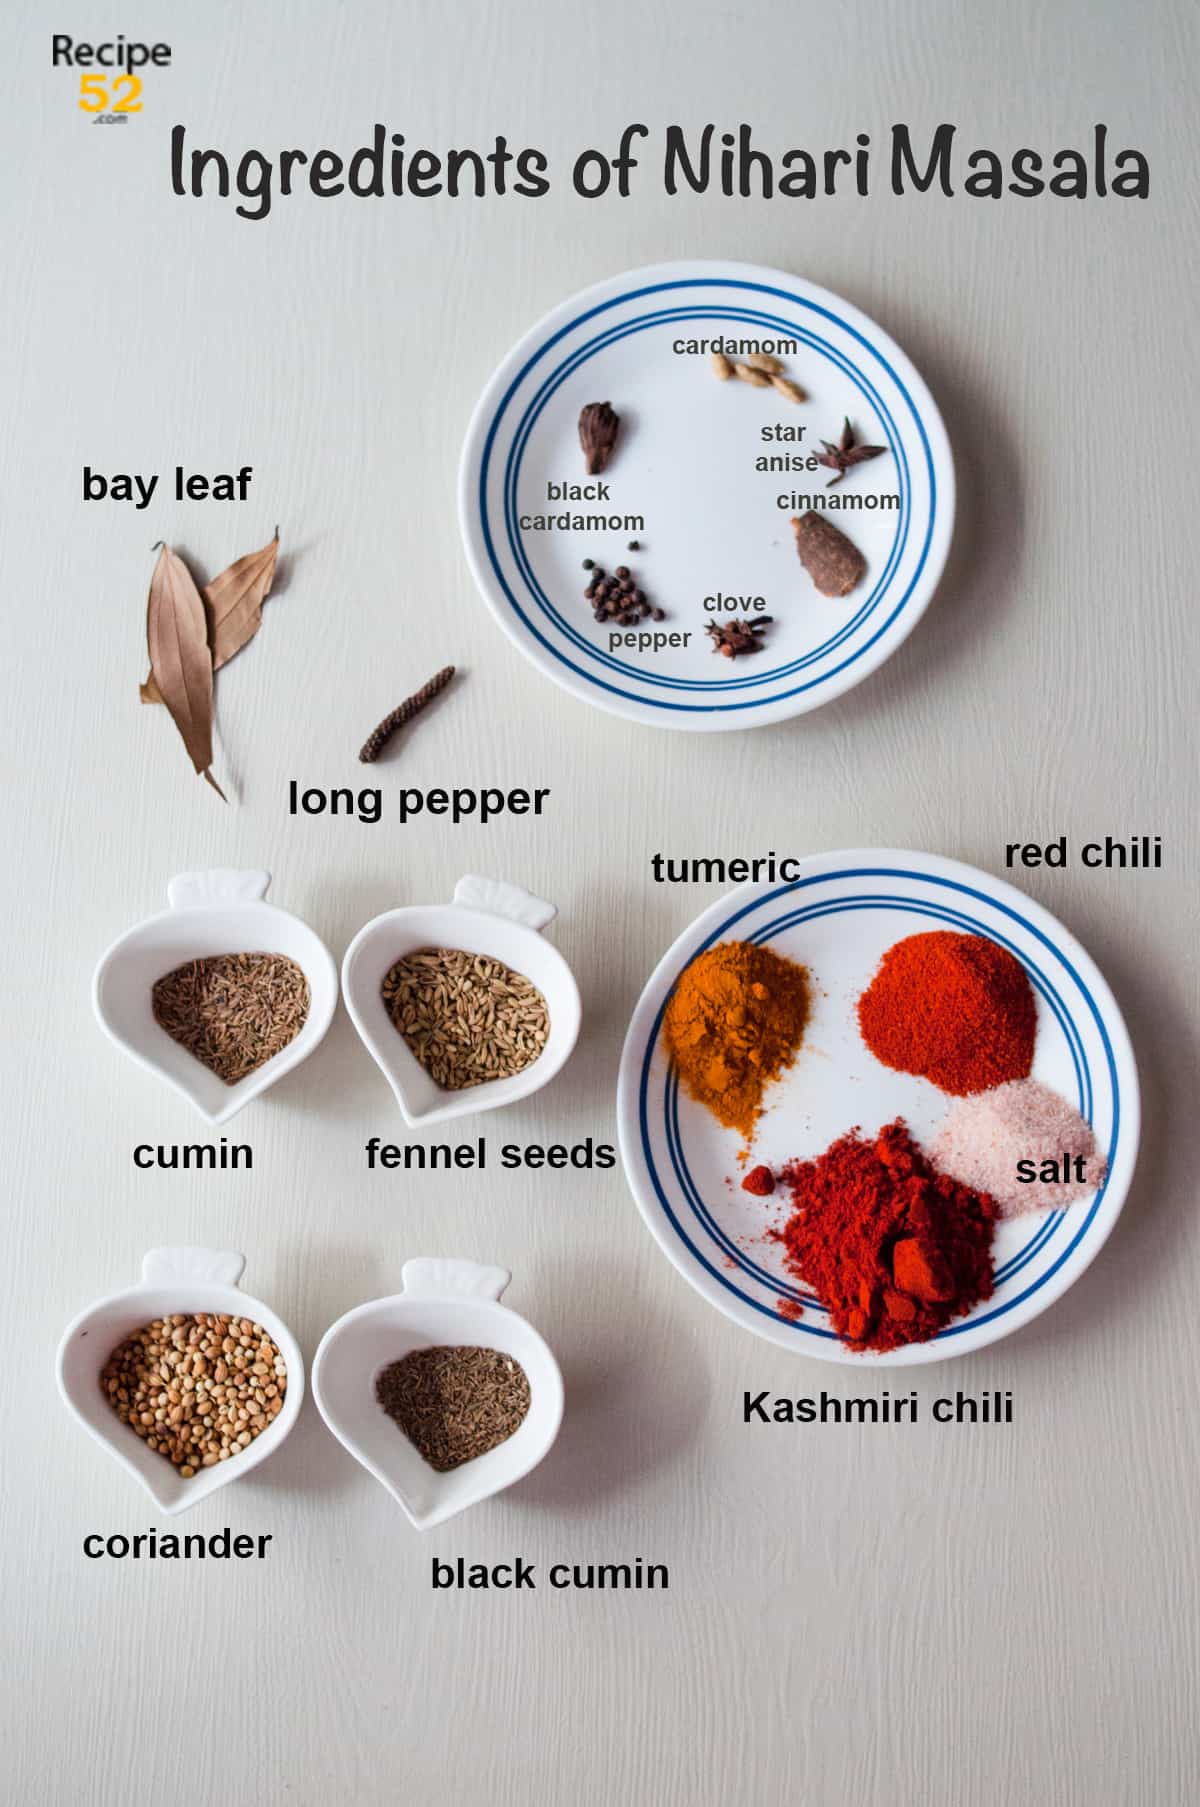 Ingredients of spice mix